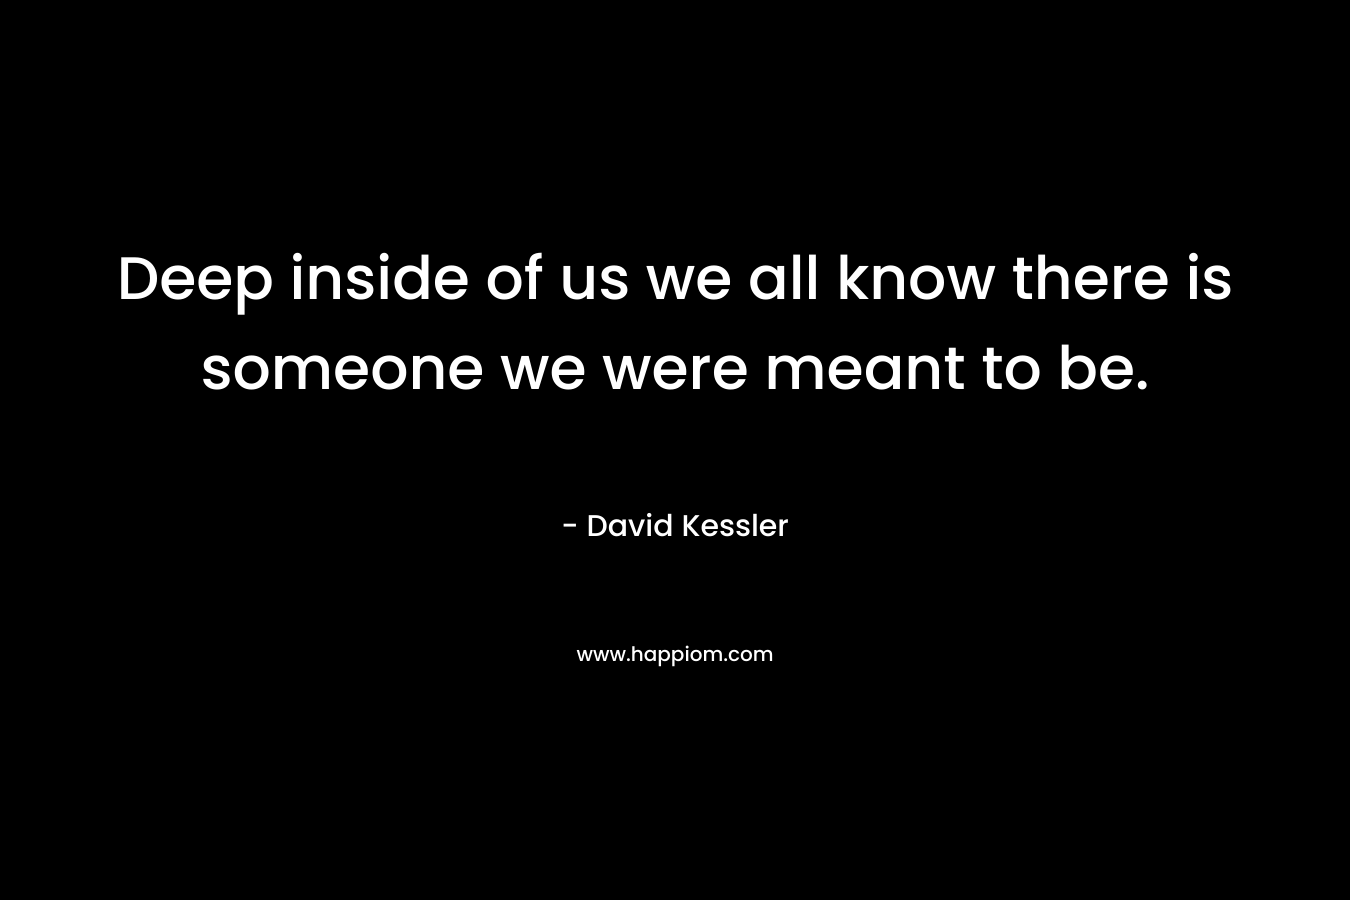 Deep inside of us we all know there is someone we were meant to be. – David Kessler